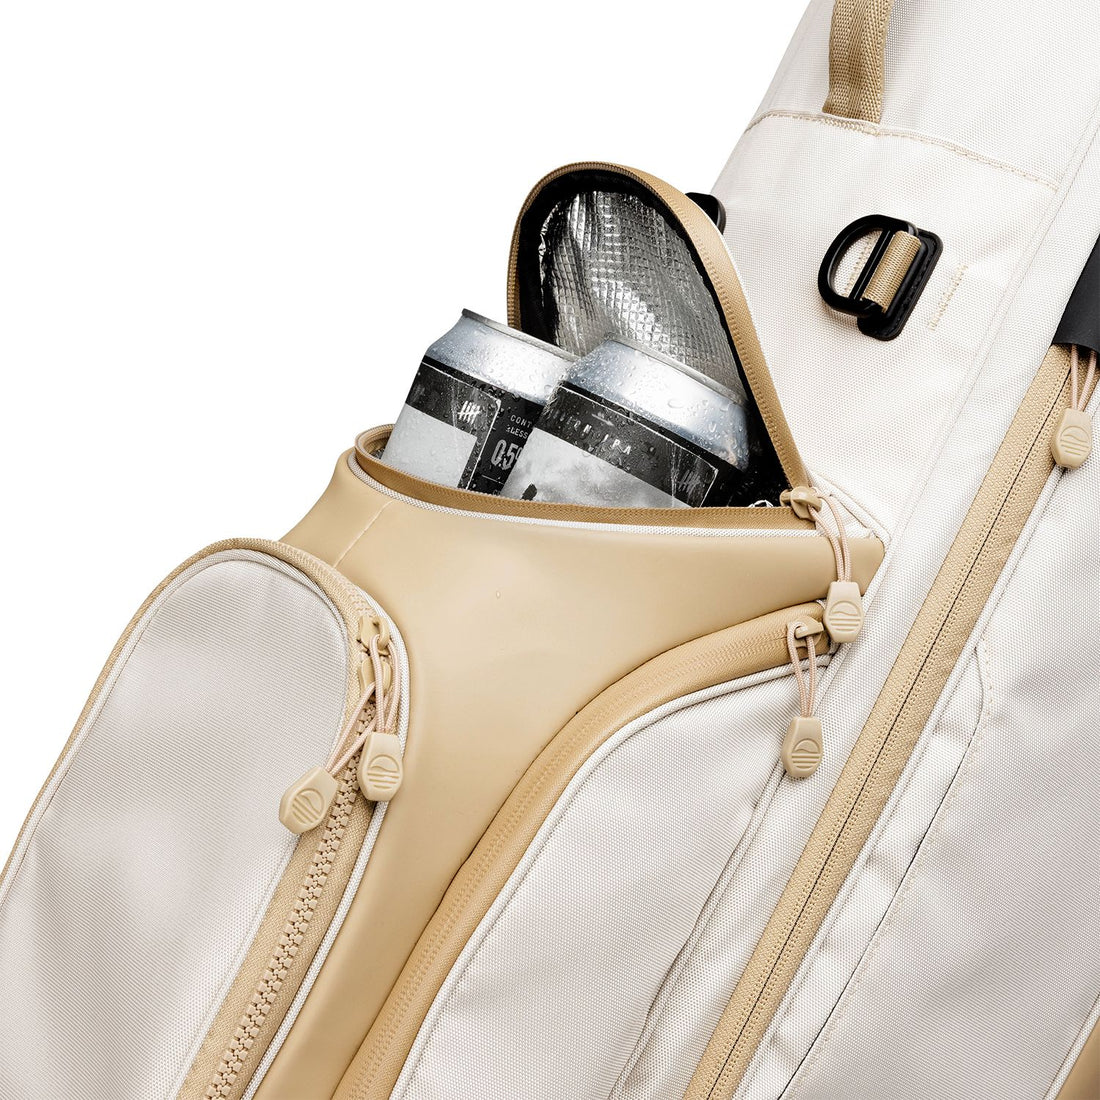 8 Best Golf Bags With A Built-In Cooler In 2023